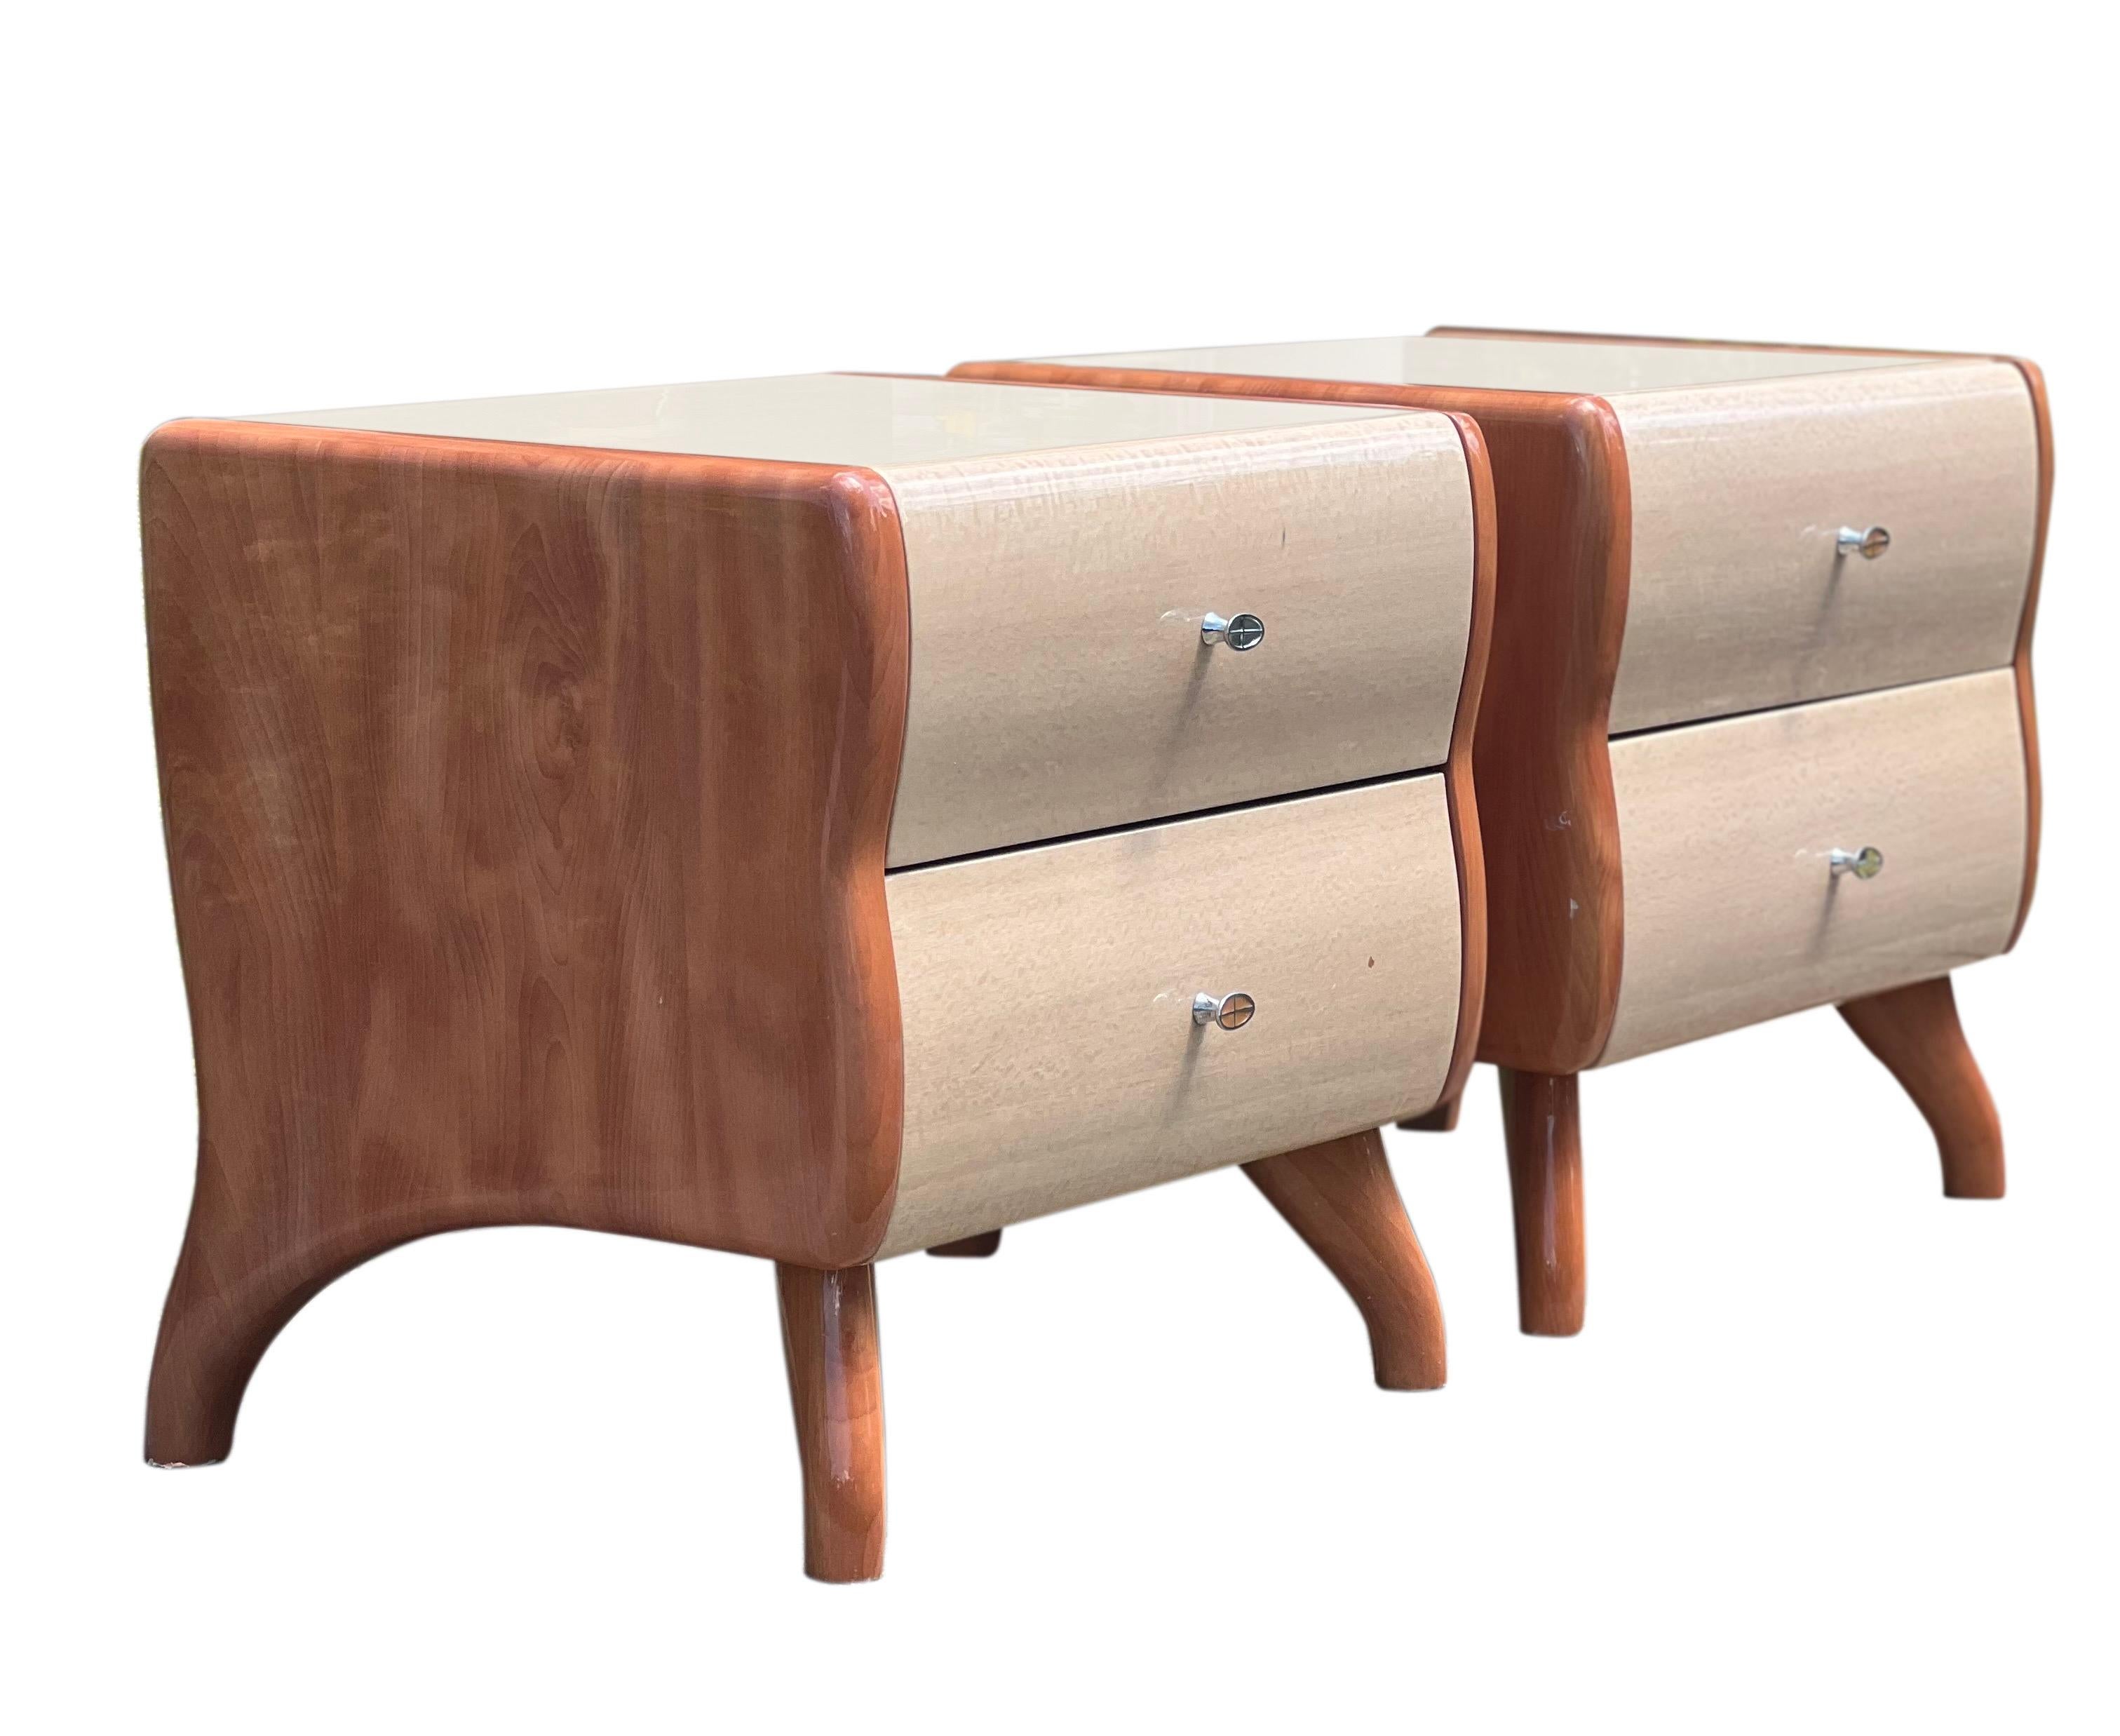 Fabulous pair of Italian lacquered, two-tone nightstands.

Crafted of maple and birch woods, the sturdy stands boast a stunning silhouette in two tone. The high quality lacquer is used throughout the entire piece and is exceptionally protective.